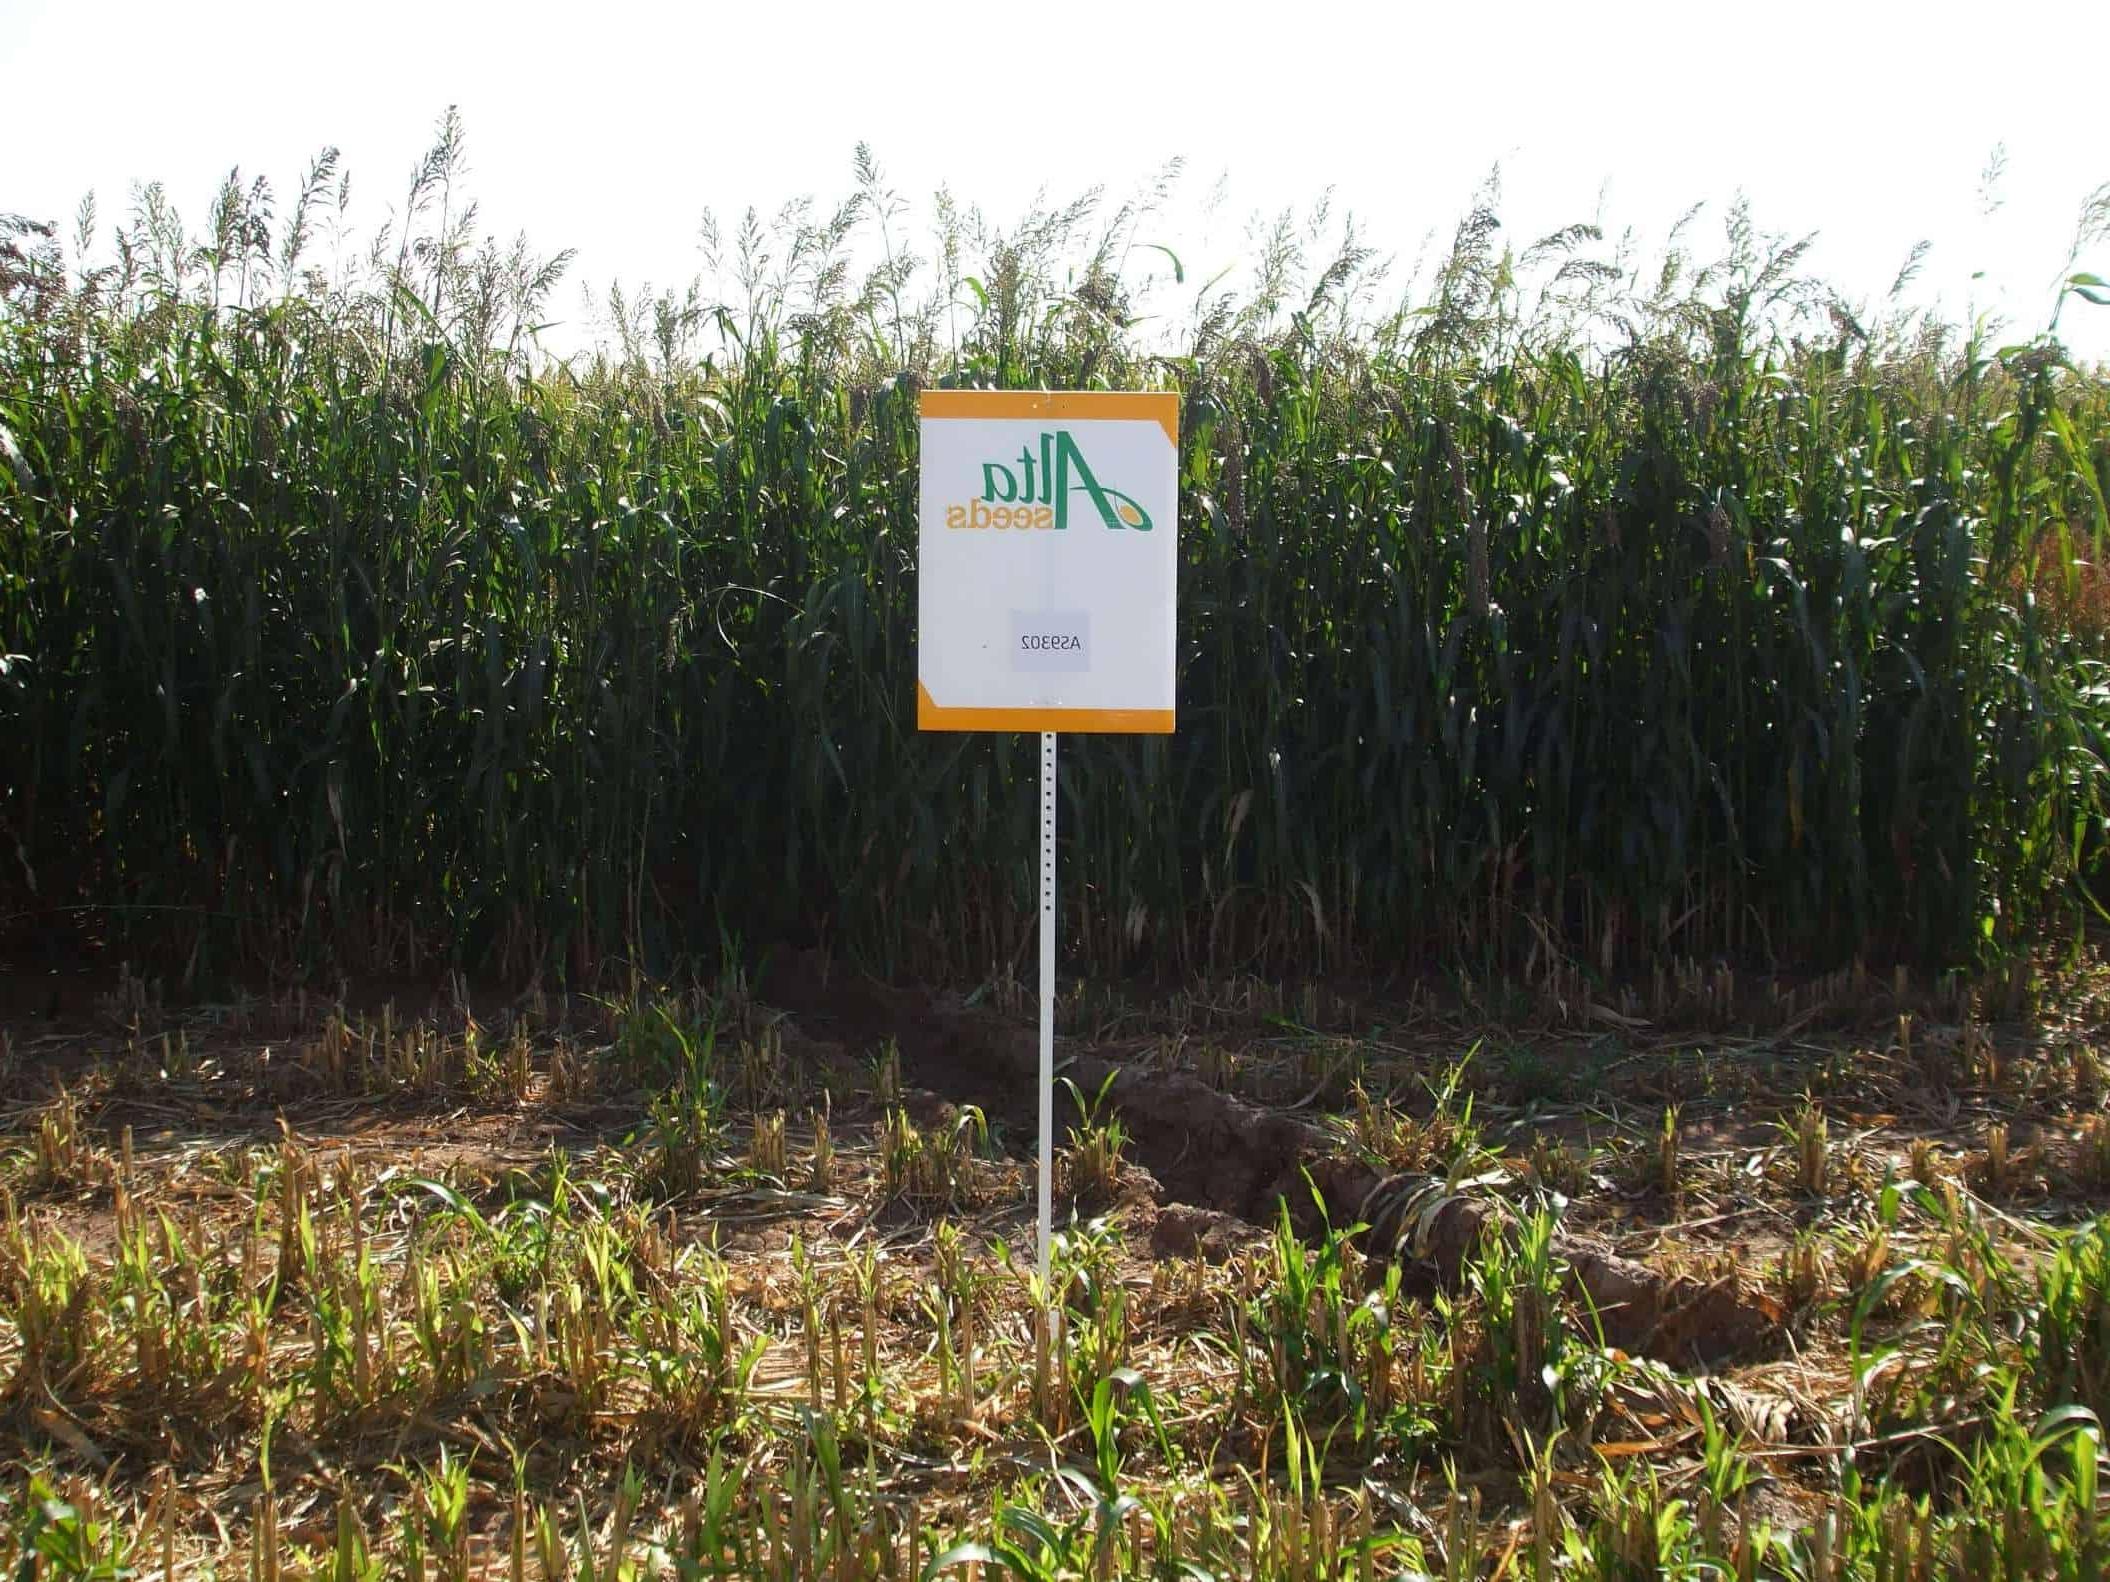 Sign next to seed crops